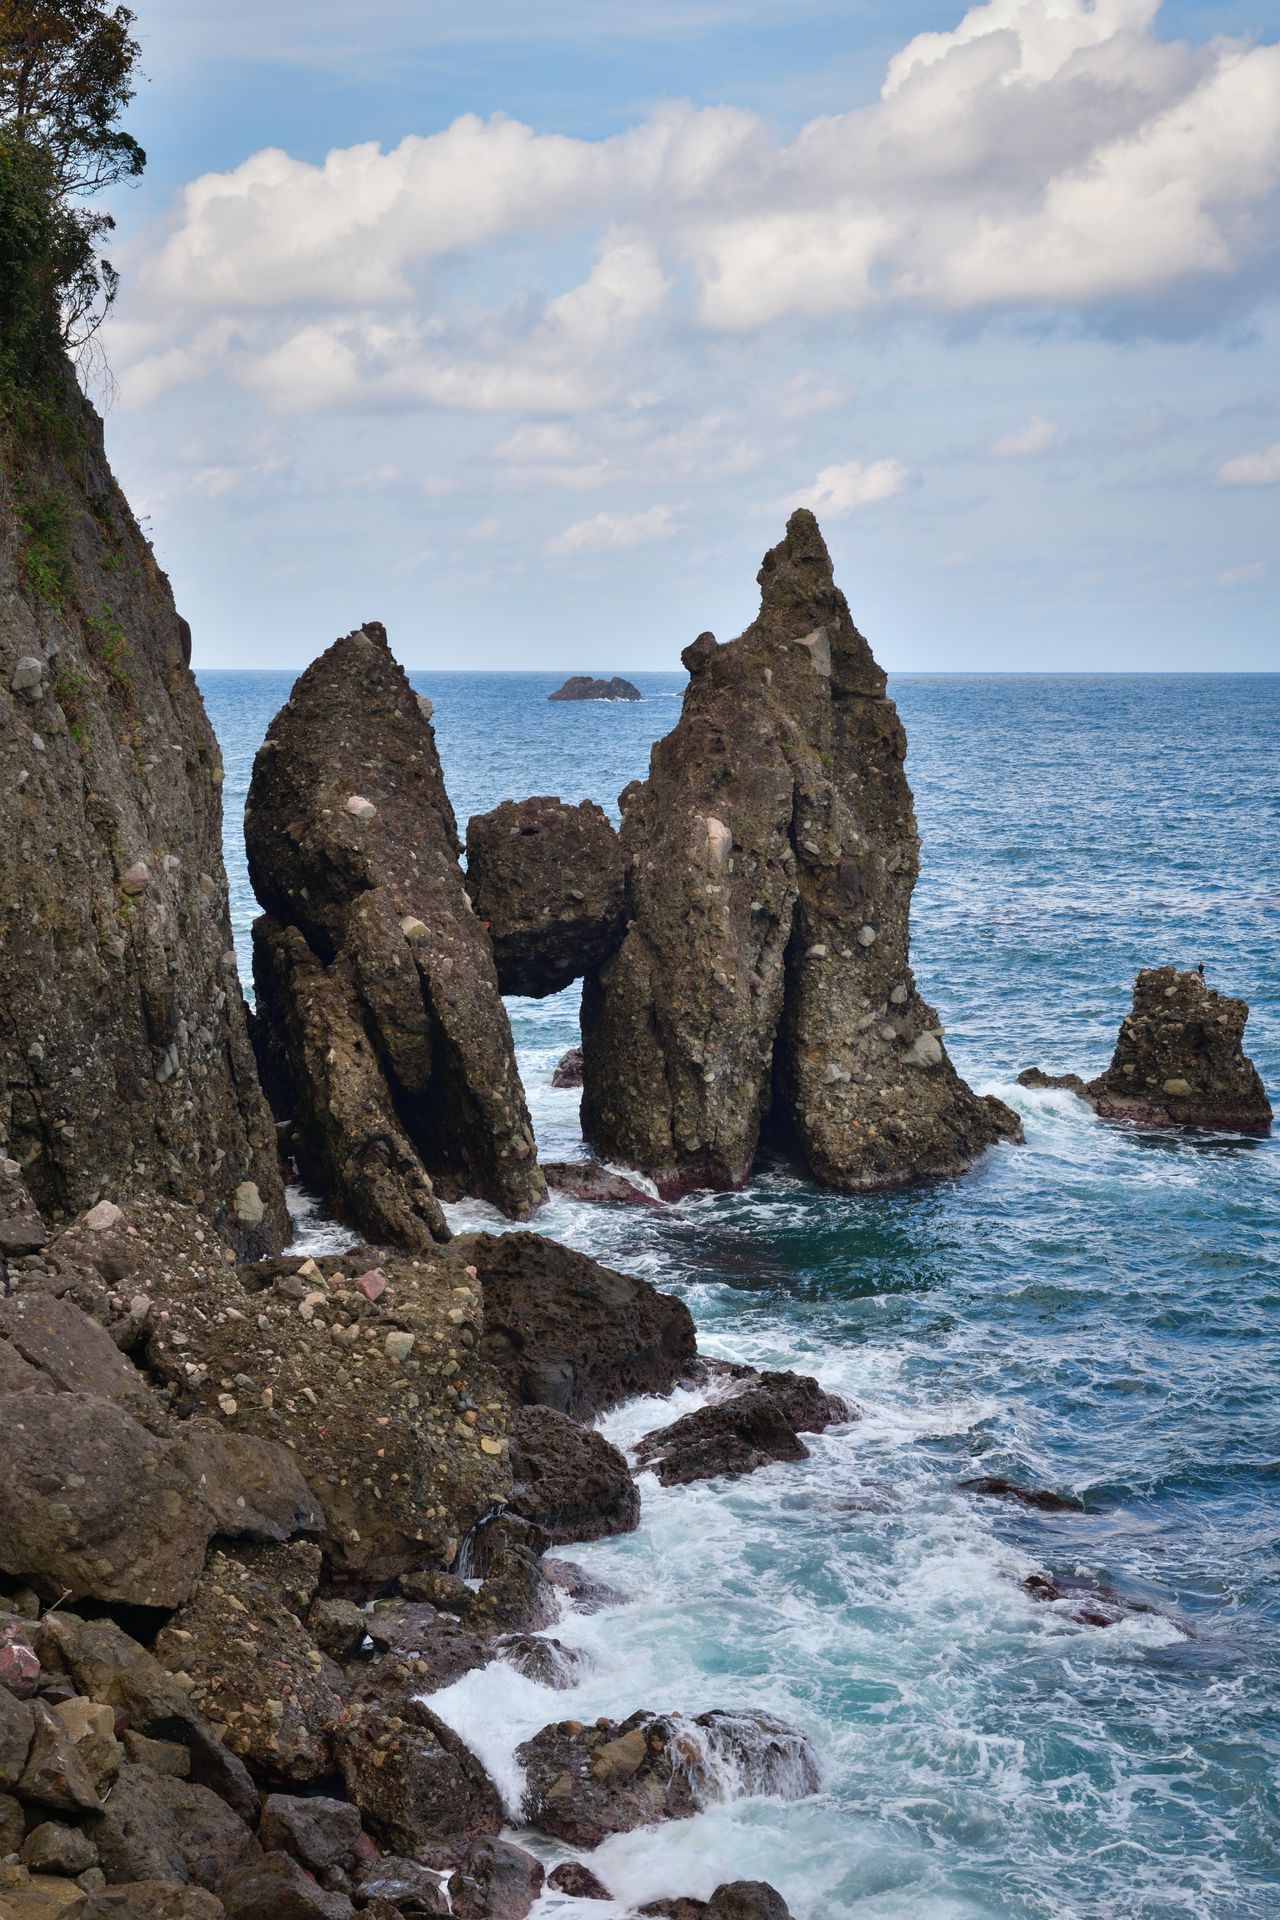 The Hasakari Rocks at Kirihama Beach were formed by the collapse of a cave roof that left the rock debris wedged between the cave walls. (Courtesy Hyōgo Tourism Bureau)